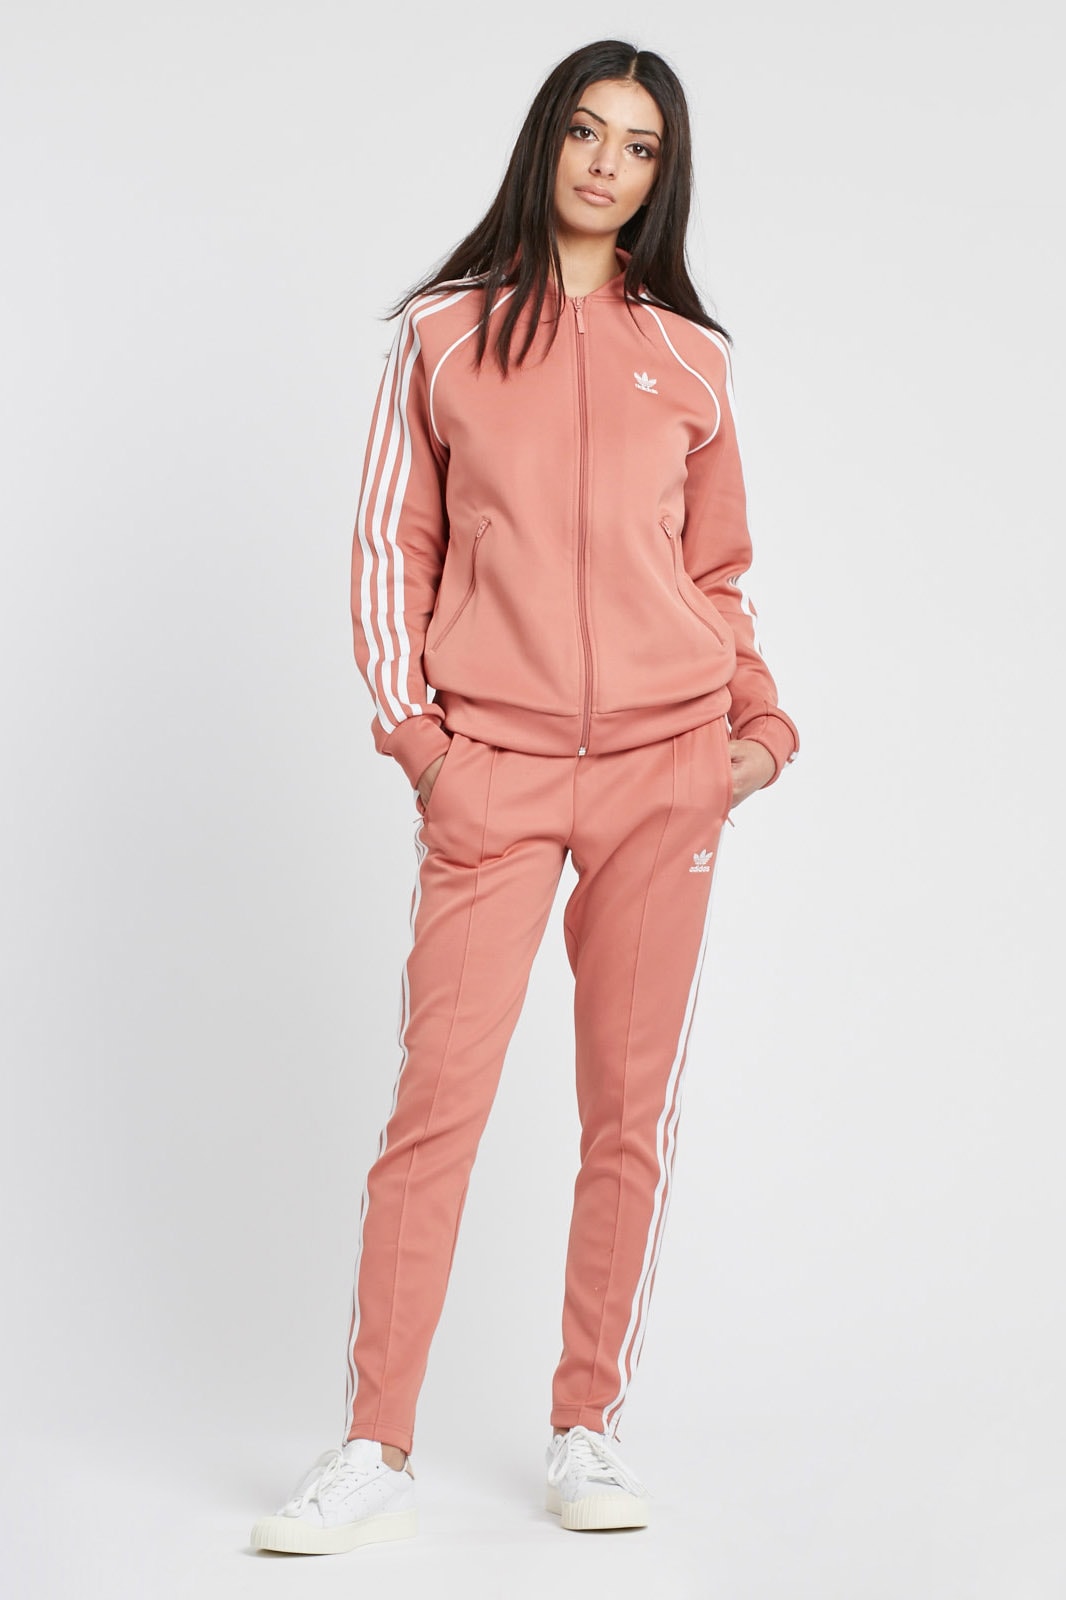 Pants from adidas for Women in Pink